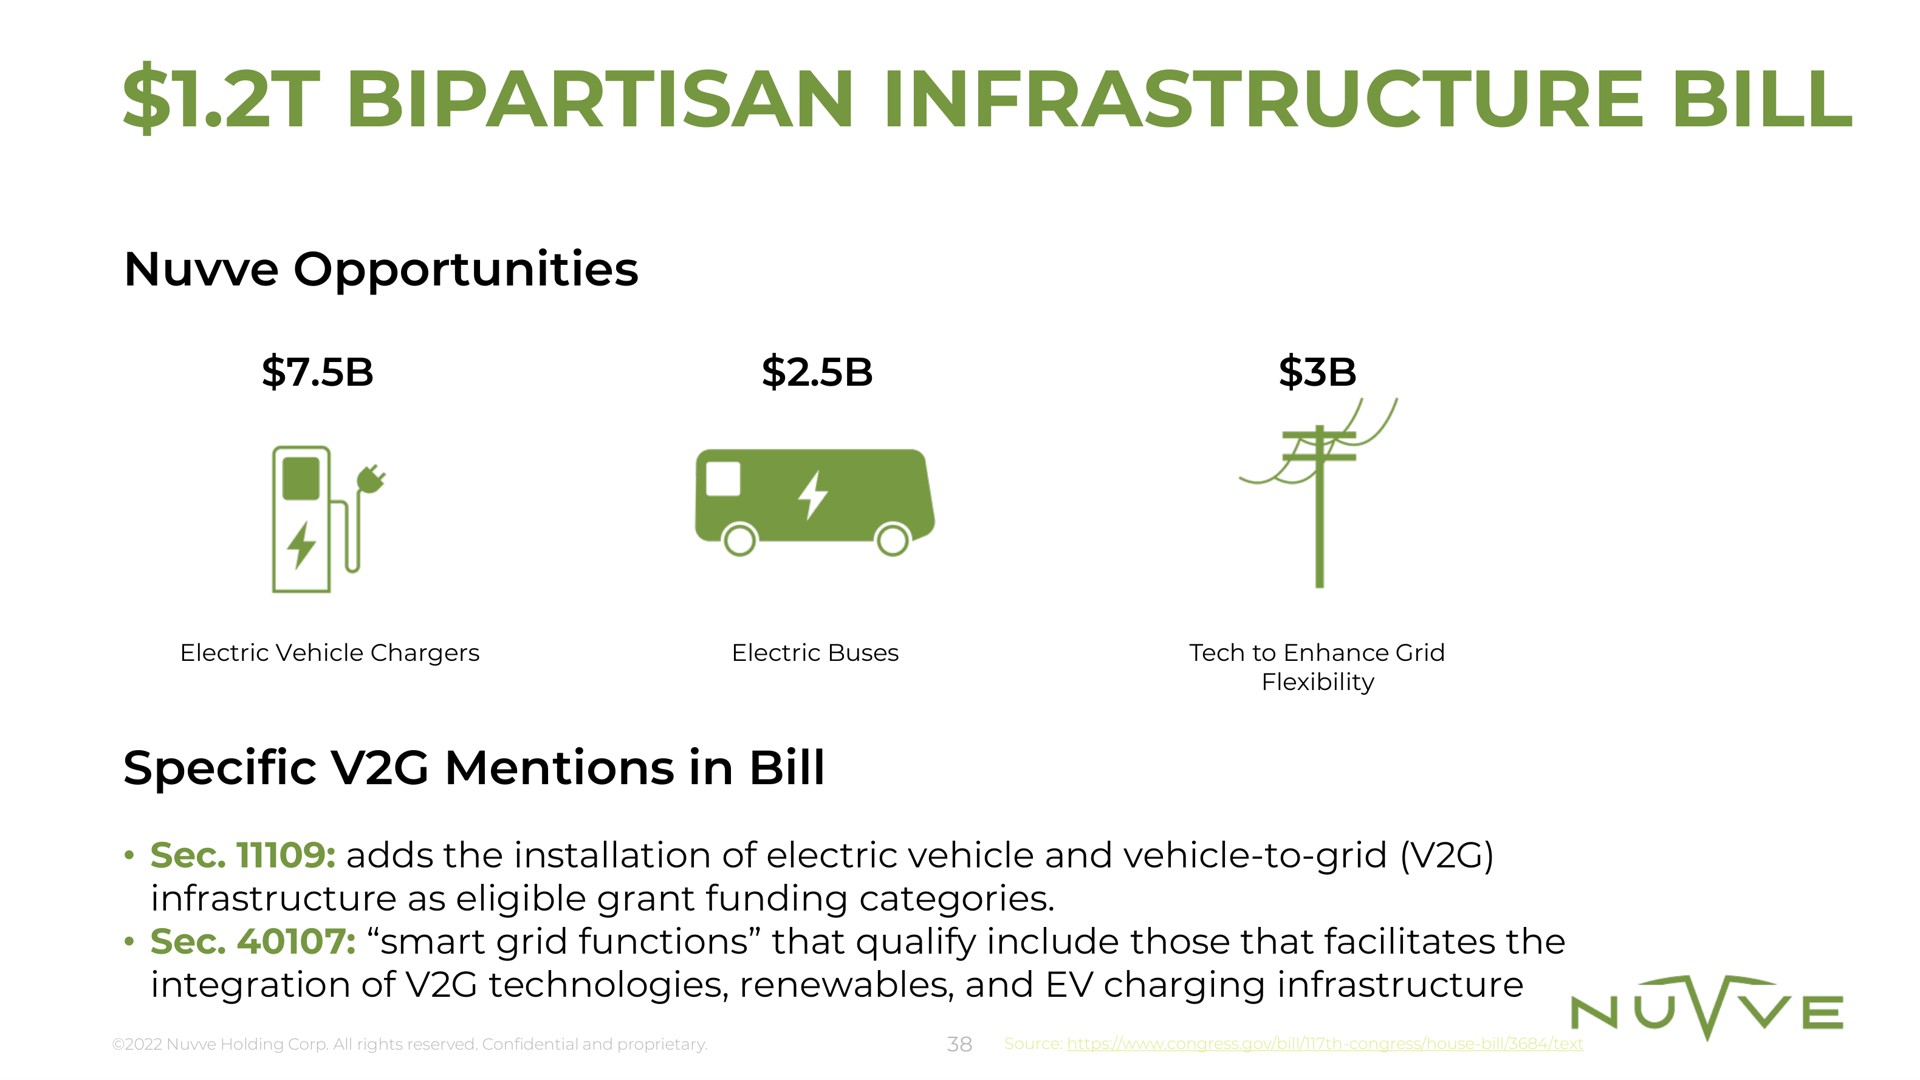 bipartisan infrastructure bill opportunities specific mentions in | Nuvve